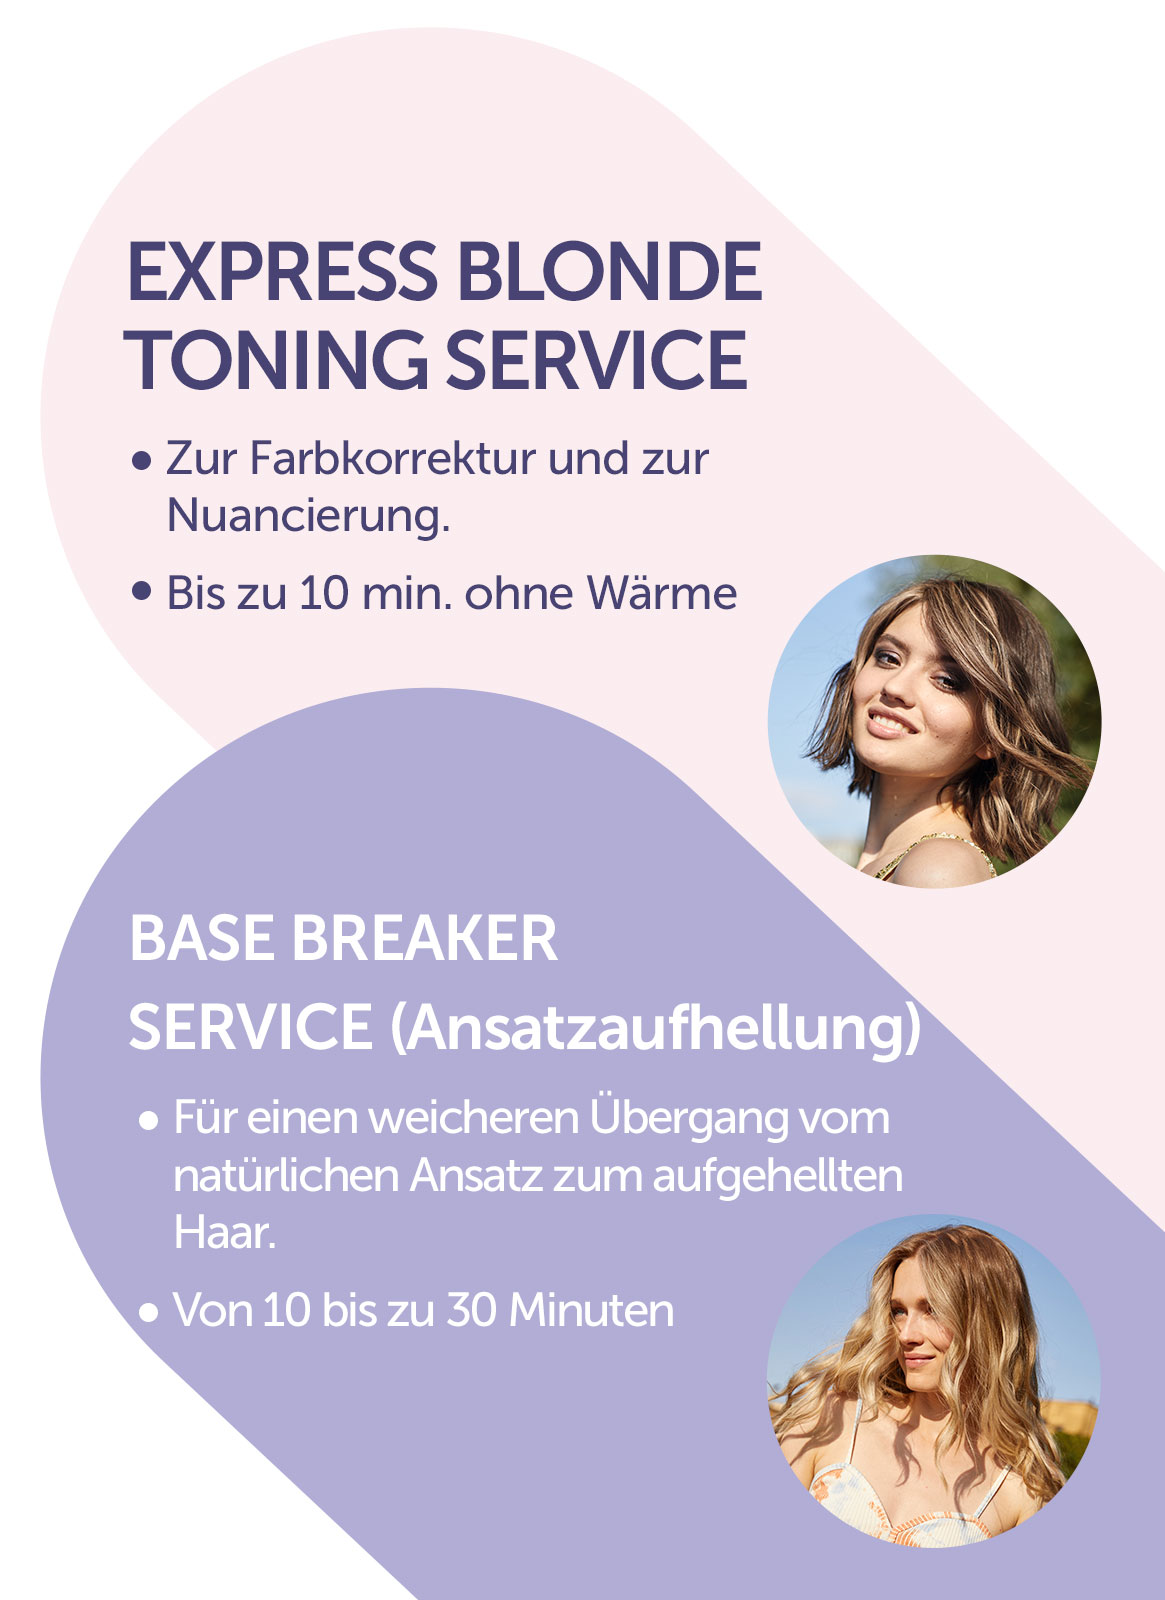 NEW BLONDE SERVICES